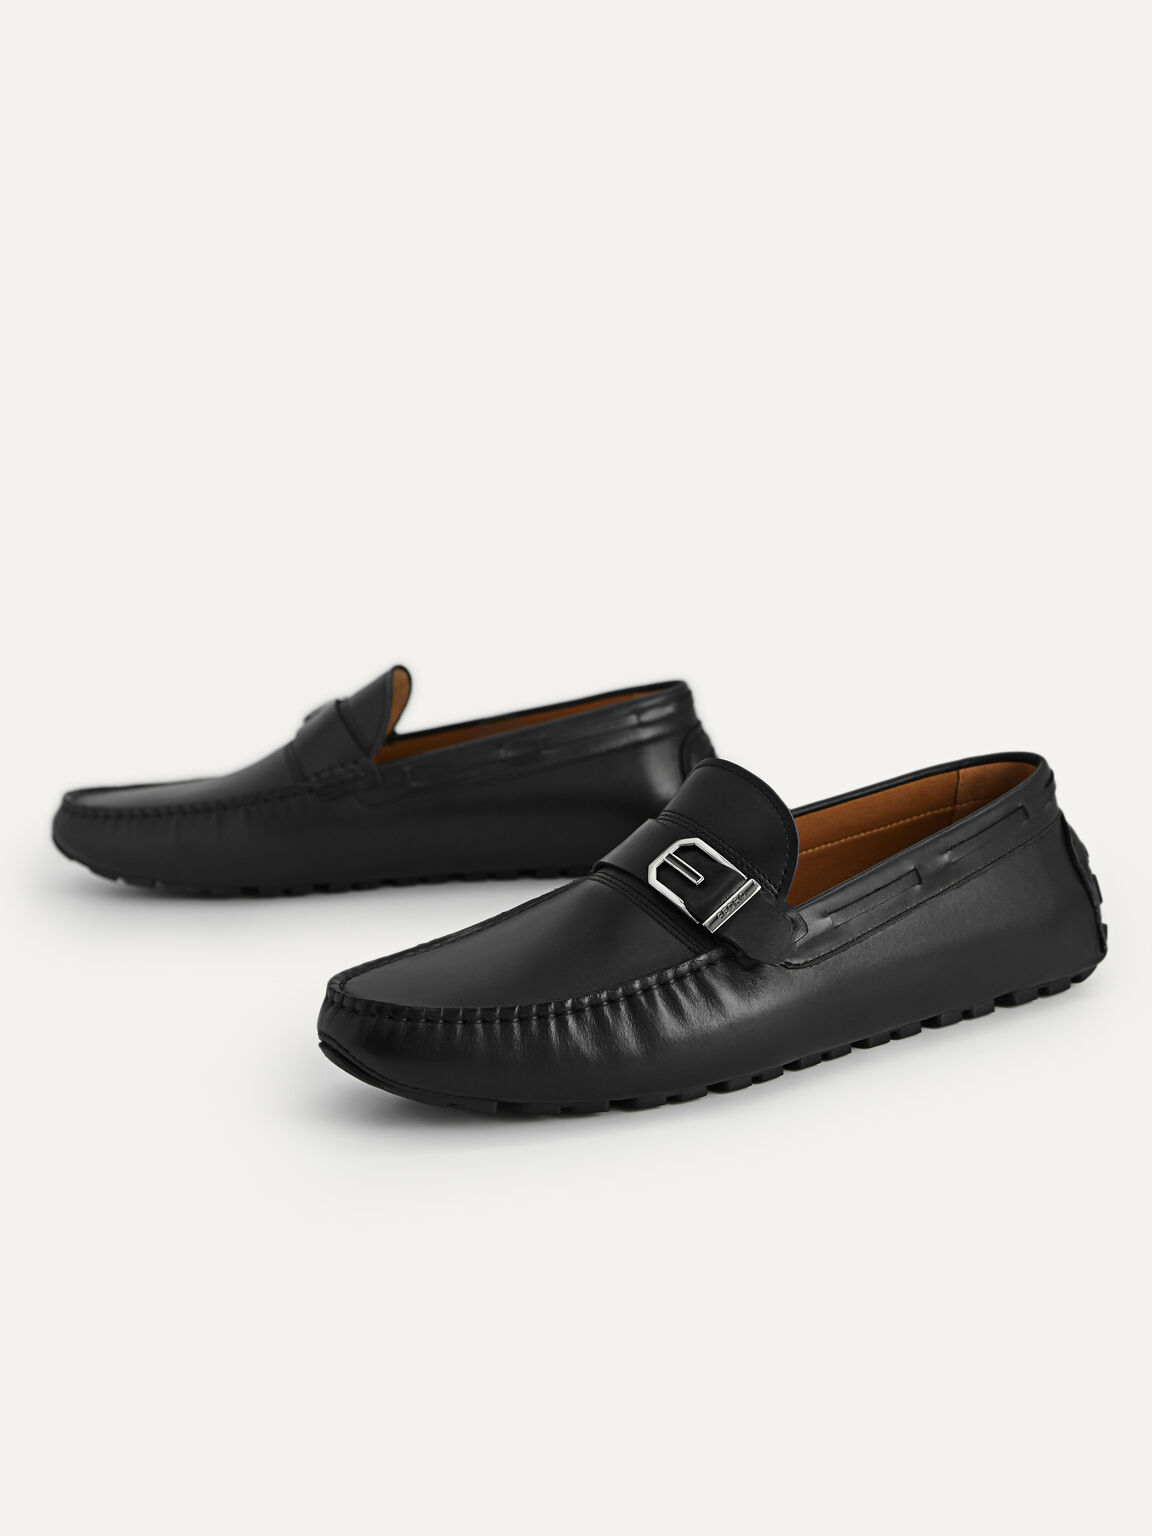 Leather Moccasins with Buckle Detailing, Black, hi-res